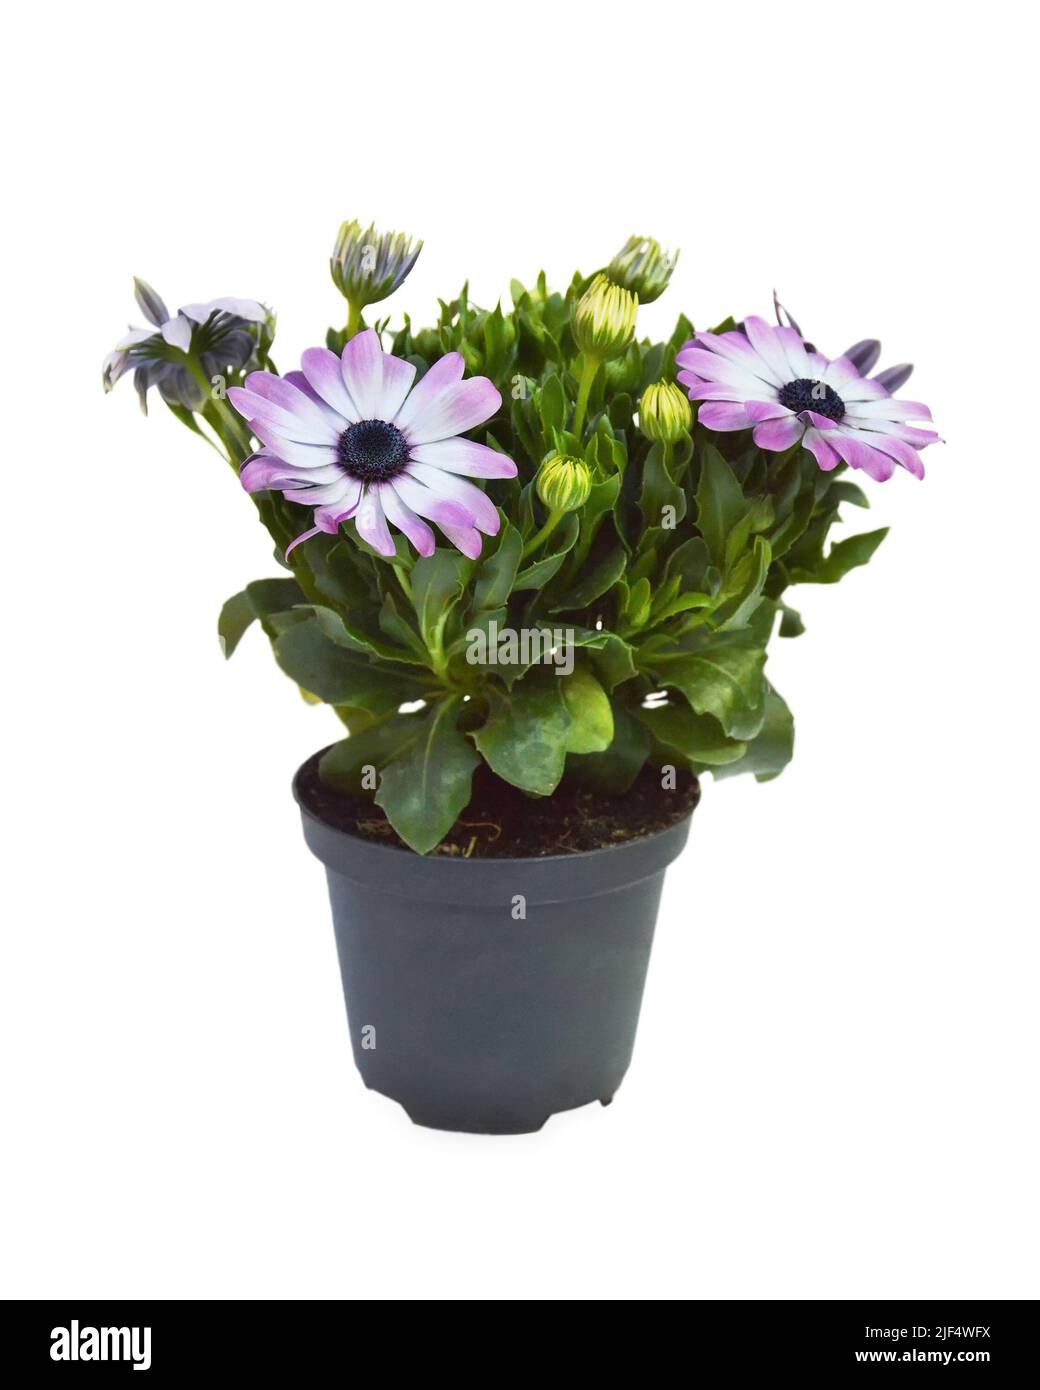 African daisies or Osteospermum in flower pot isolated on white background Stock Photo